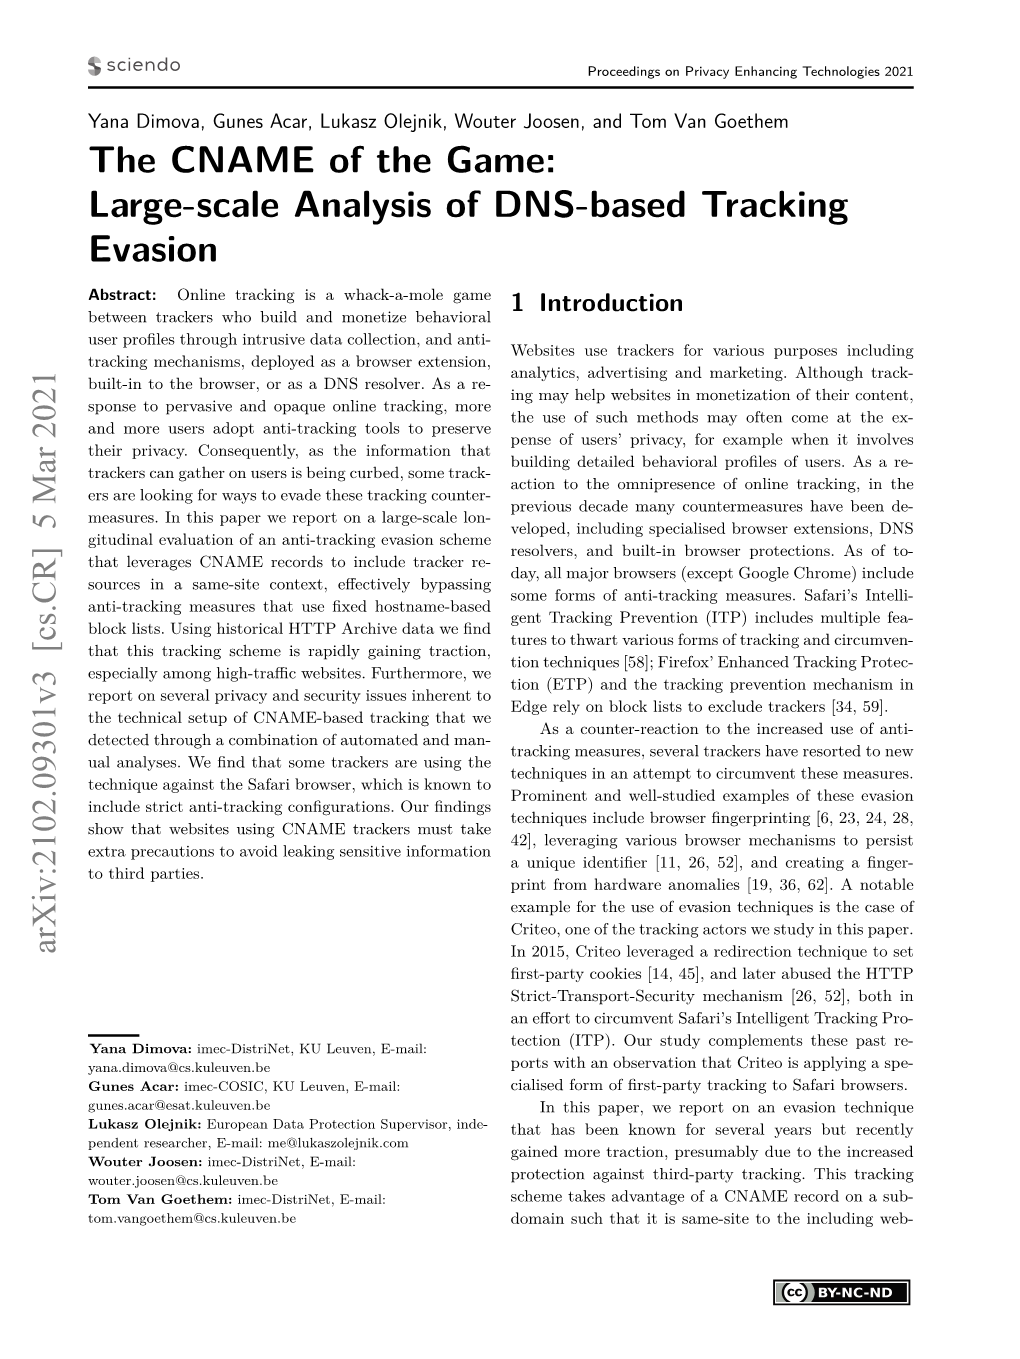 The CNAME of the Game: Large-Scale Analysis of DNS-Based Tracking Evasion